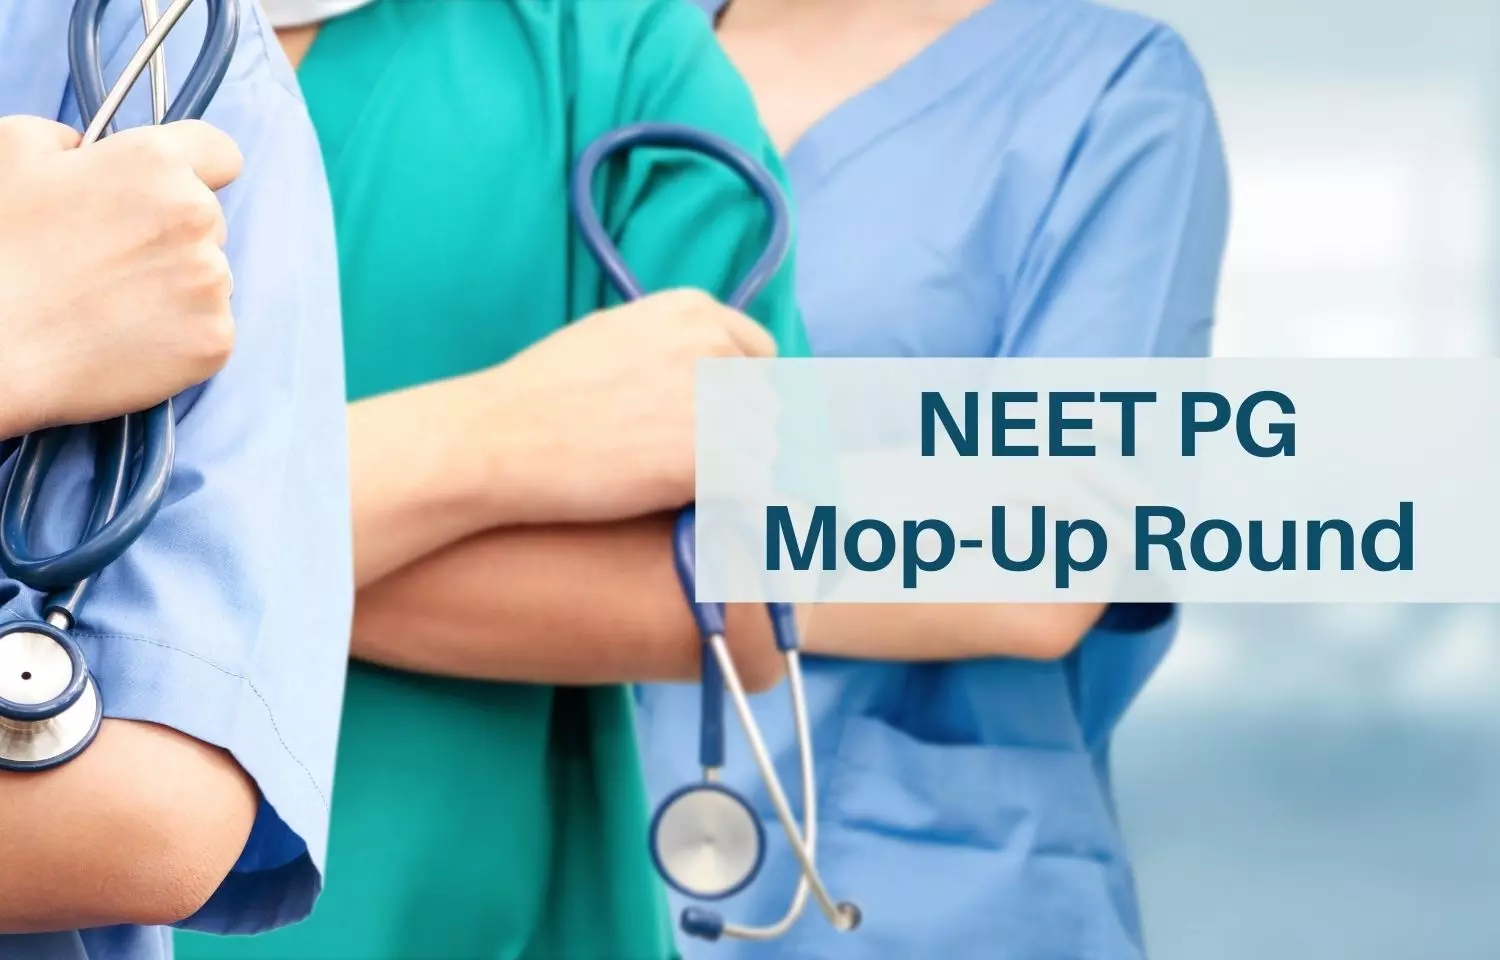 KEA releases Revised Schedule for NEET PG Counselling Mop up round, Details